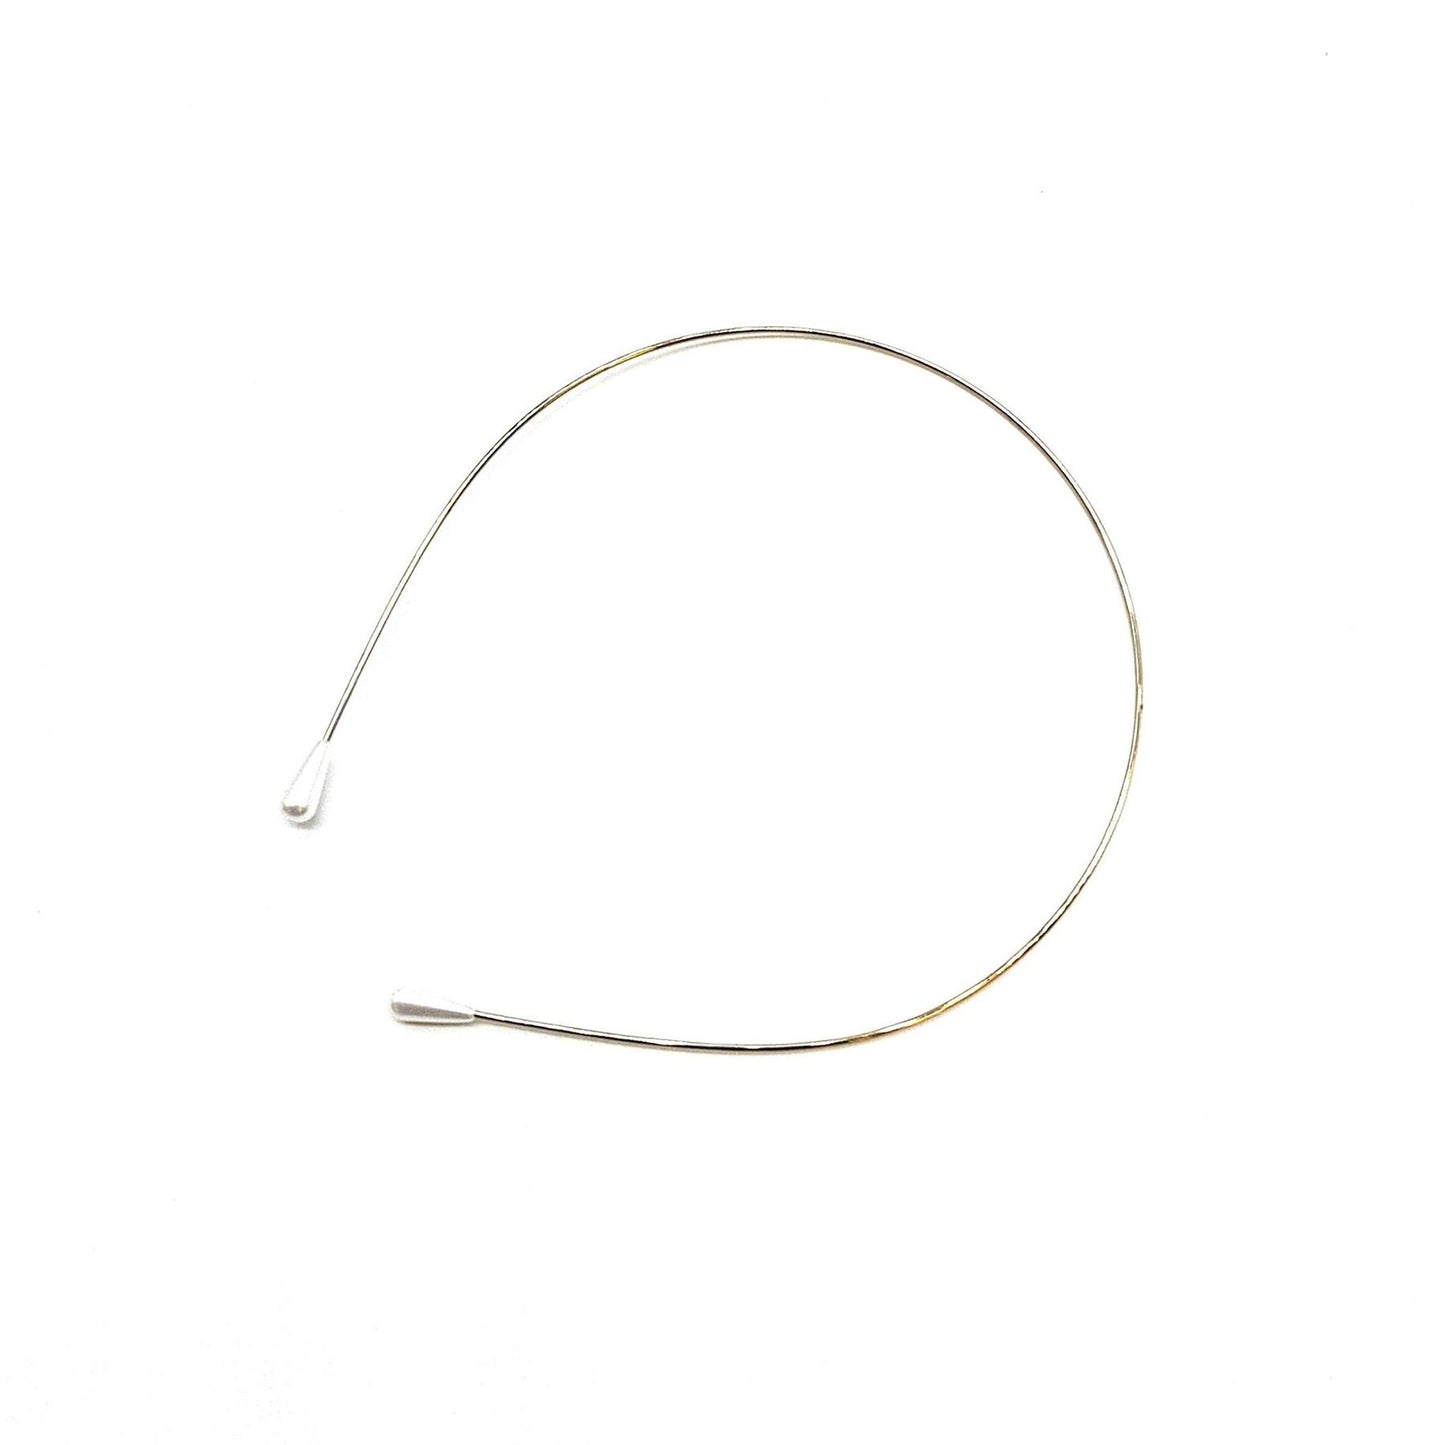 Headband Metal 1mm With Removable Prongs HB011